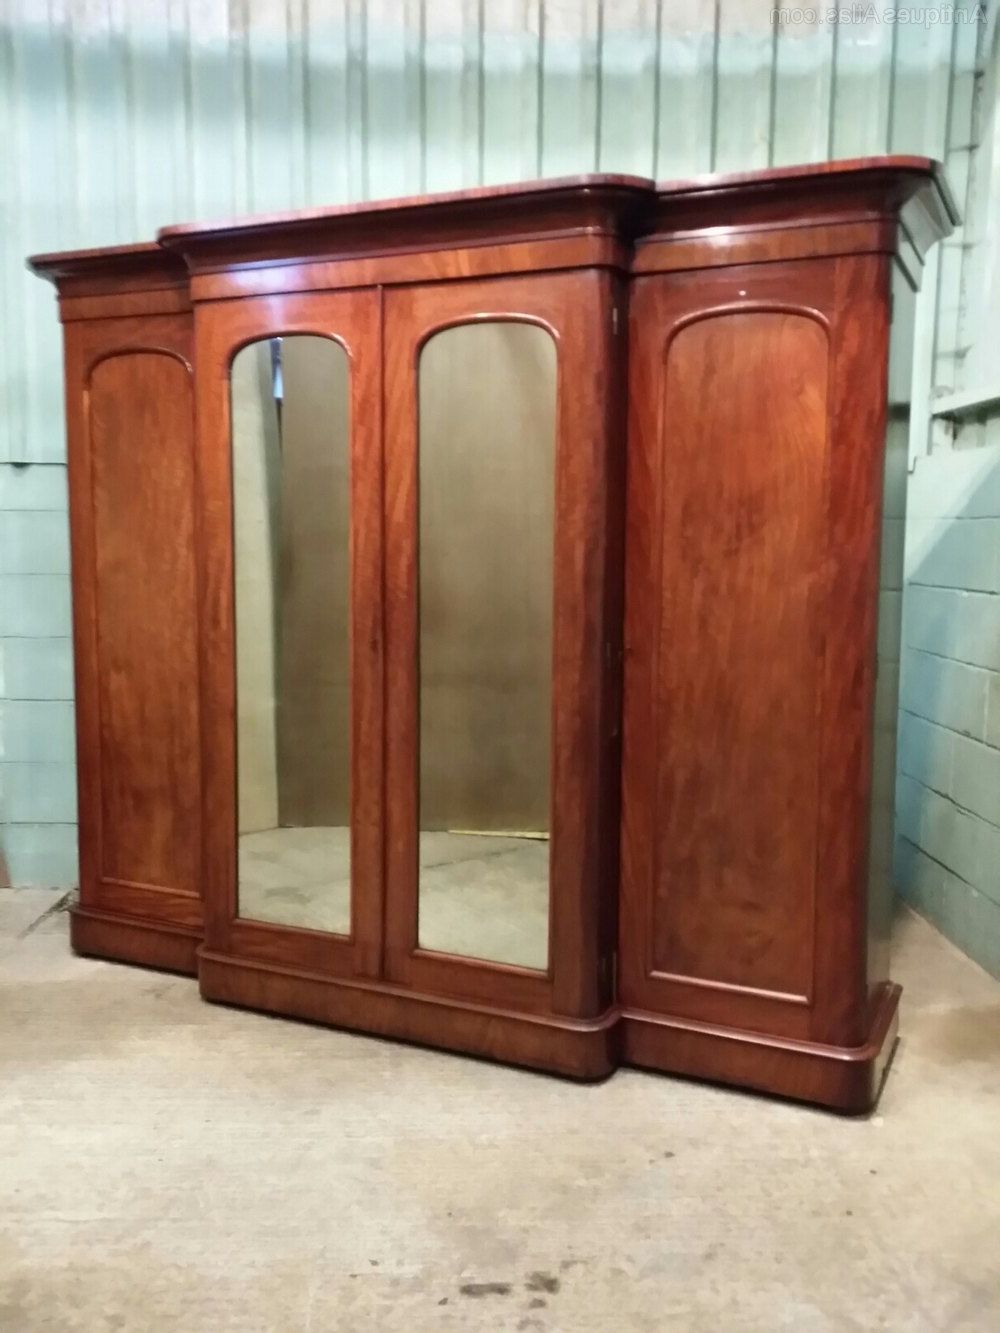 Latest Mahogany Breakfront Wardrobes Throughout Antique Victorian Mahogany Four Door Wardrobe C188 – Antiques Atlas (View 8 of 15)